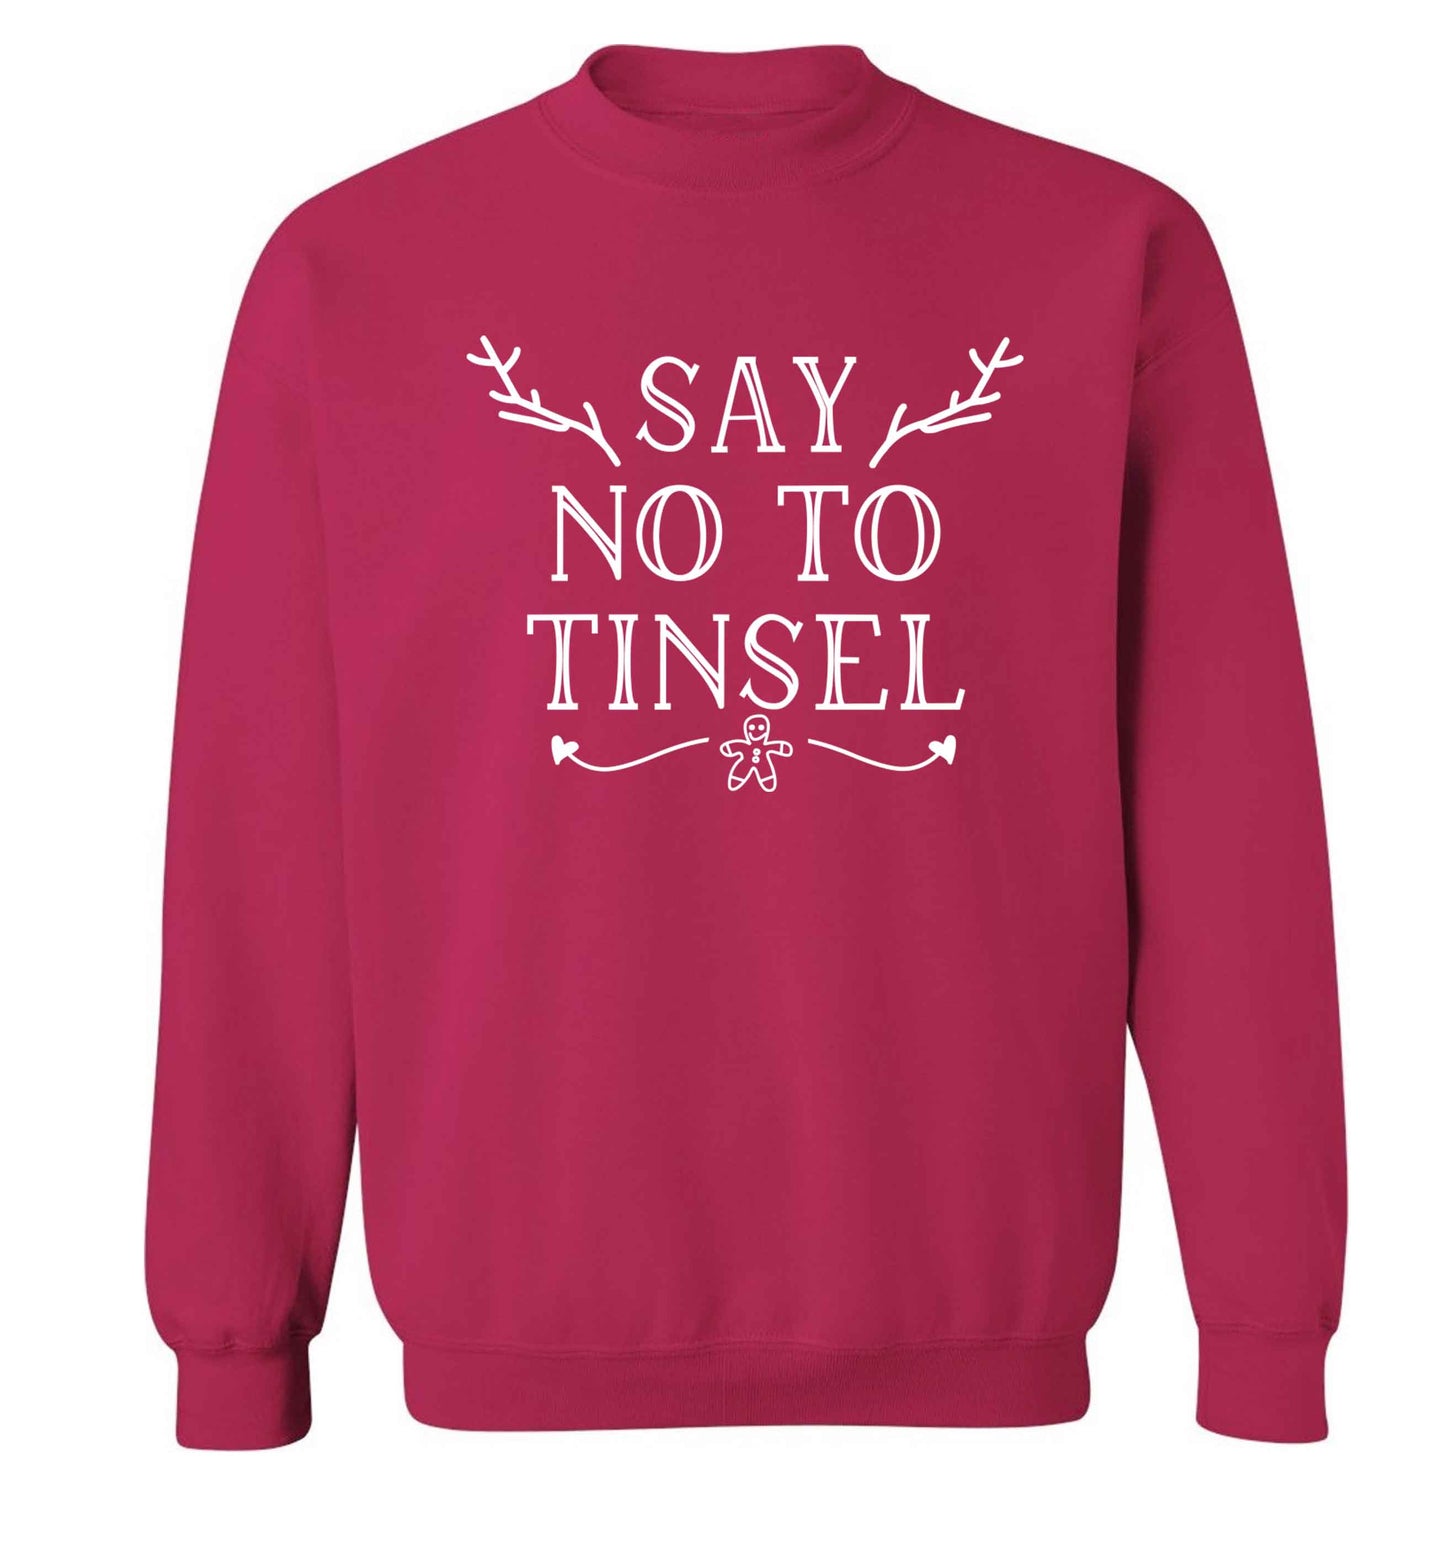 Say no to tinsel Adult's unisex pink Sweater 2XL